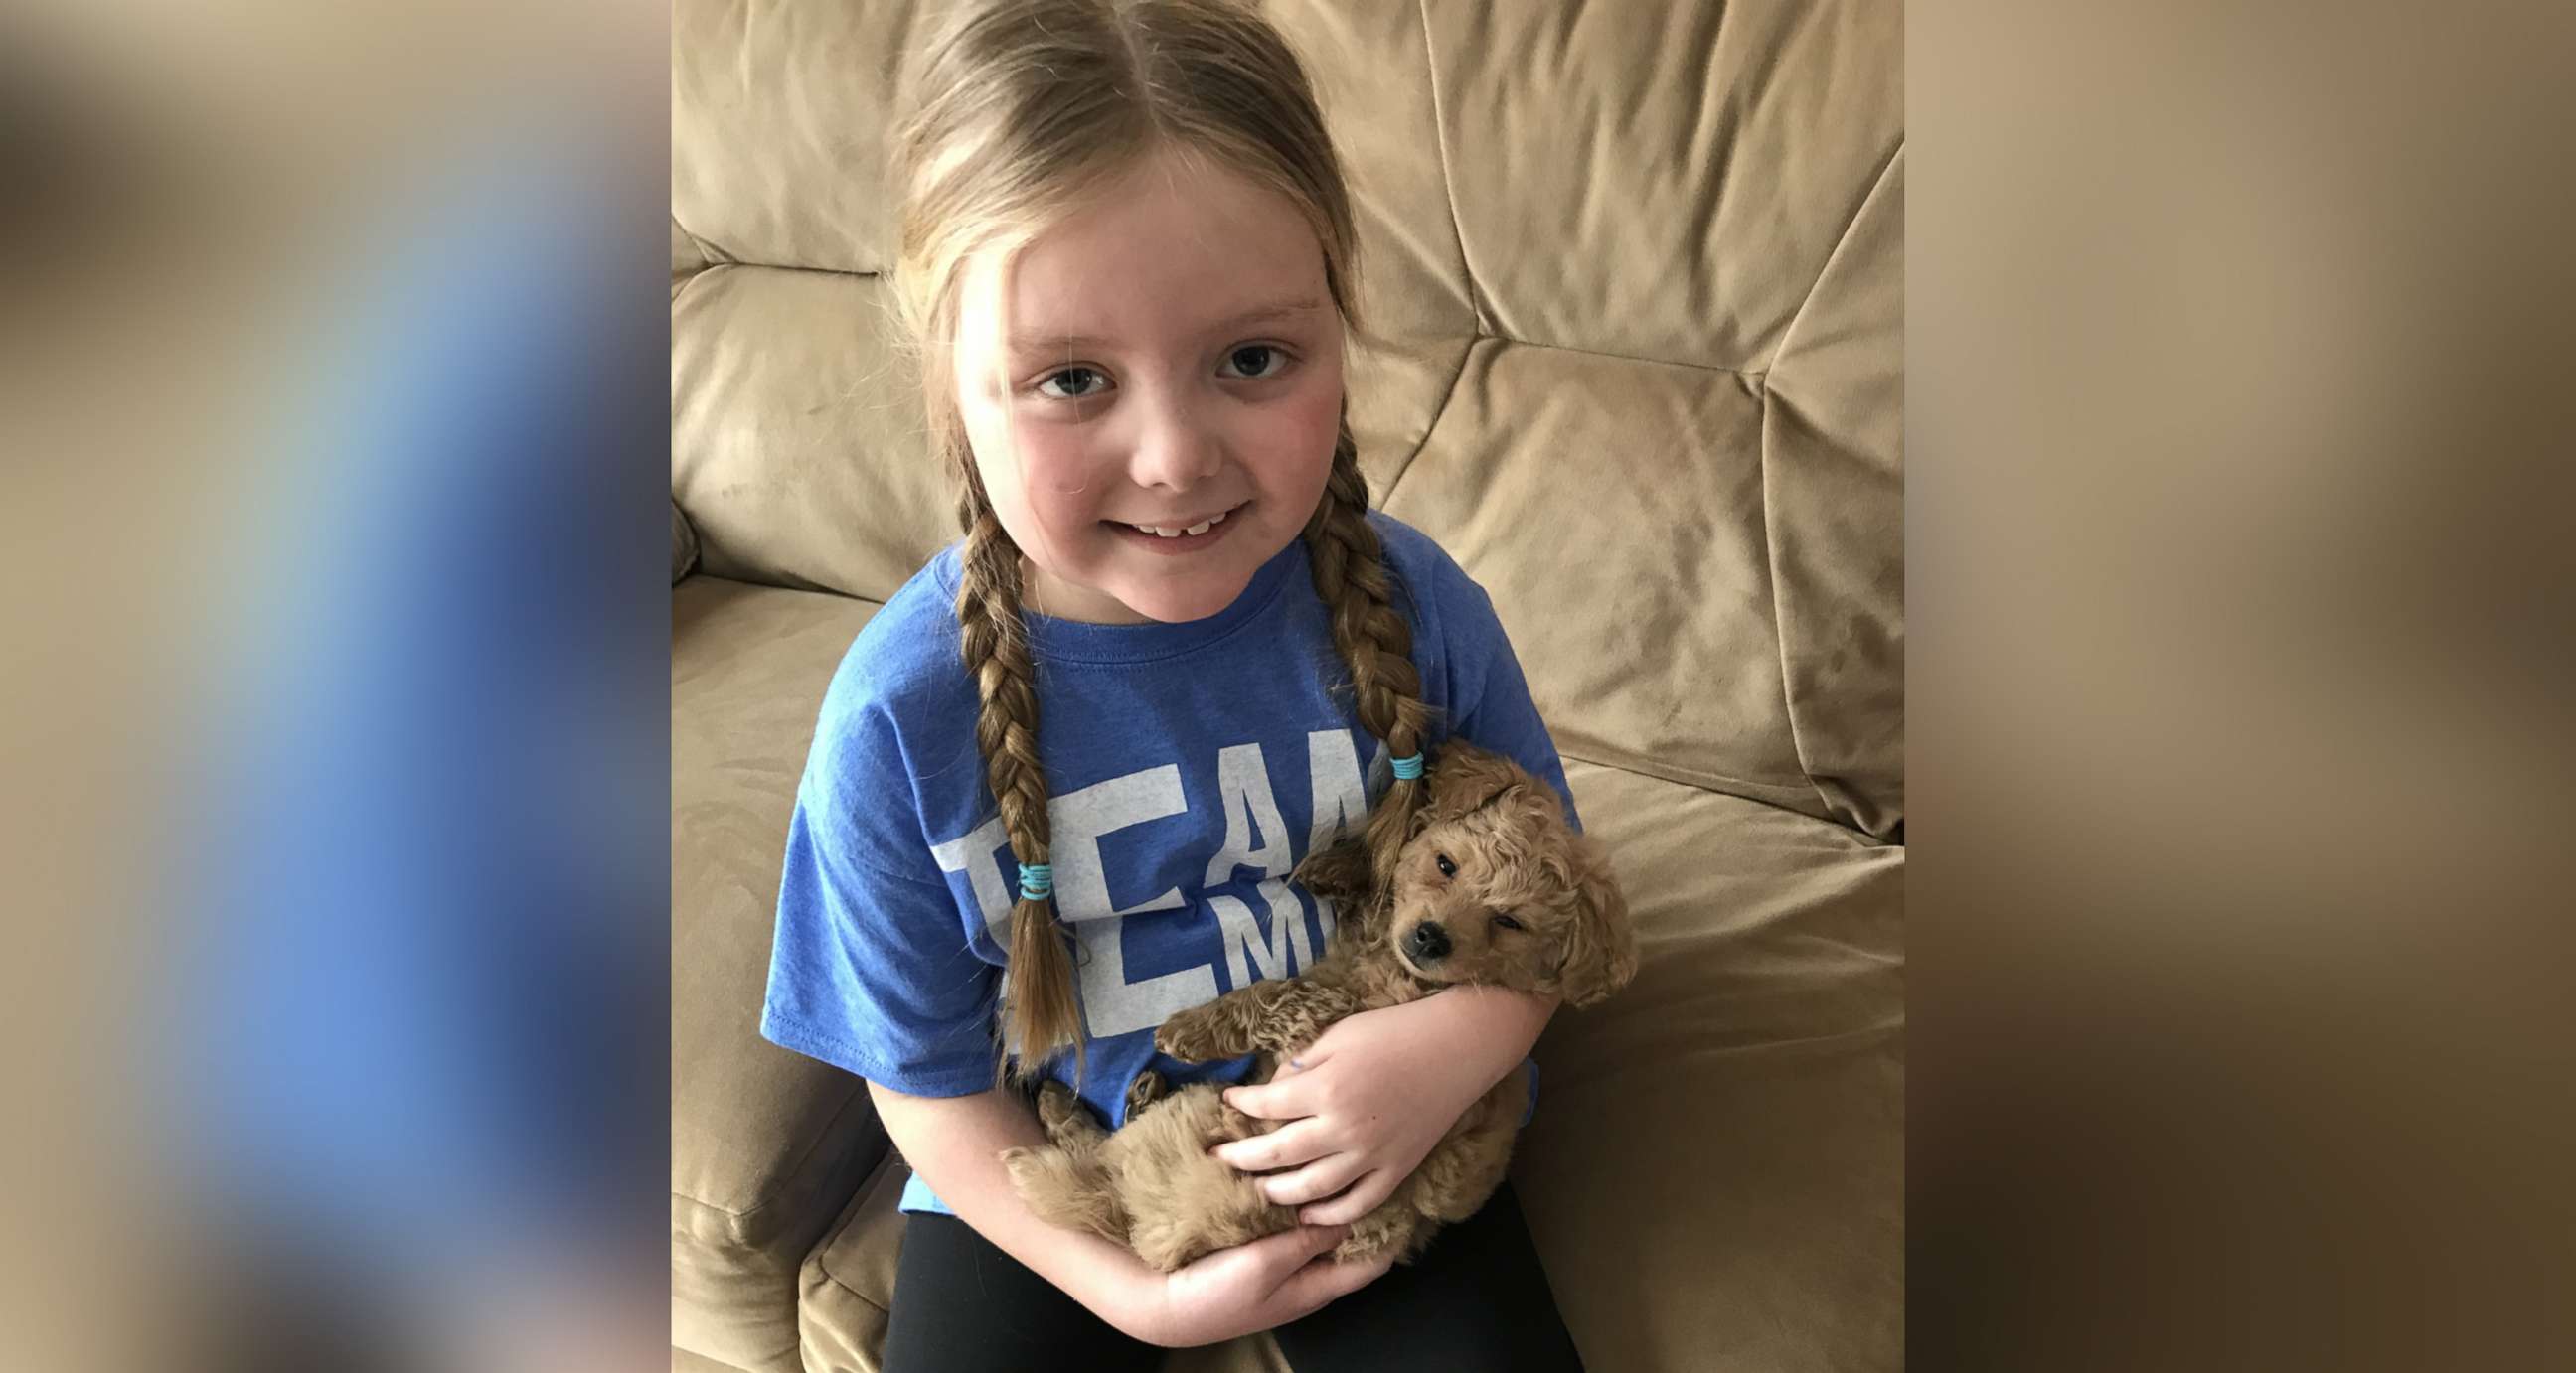 PHOTO: Emma Mertens, 7, of Wisconsin, was diagnosed with a brain tumor on Jan. 23, 2019.